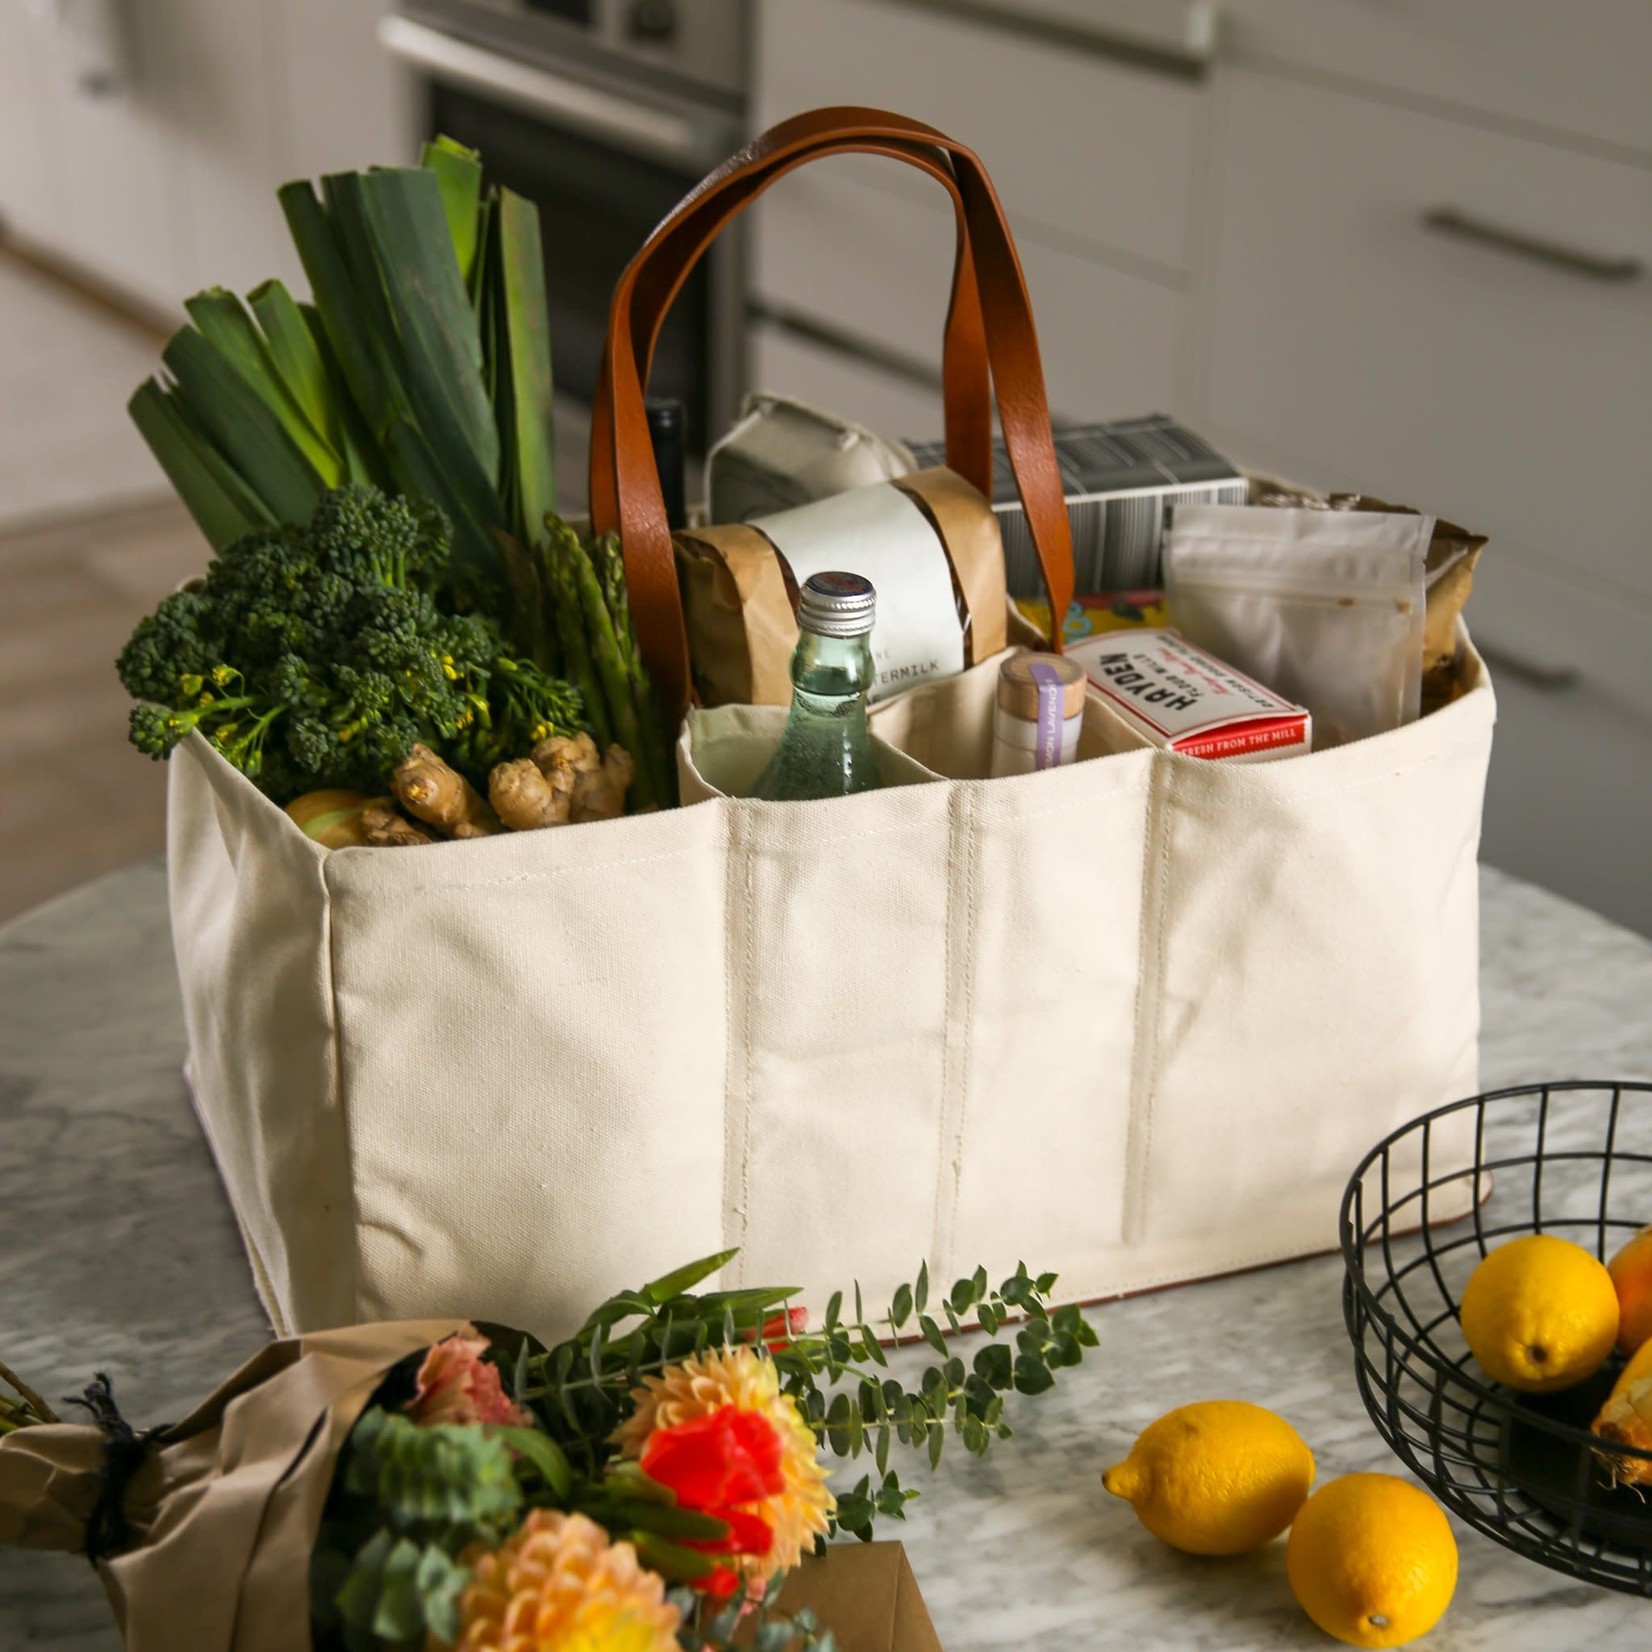 tote+able Grocery Tote - Natural Canvas with Brown Handles and Base